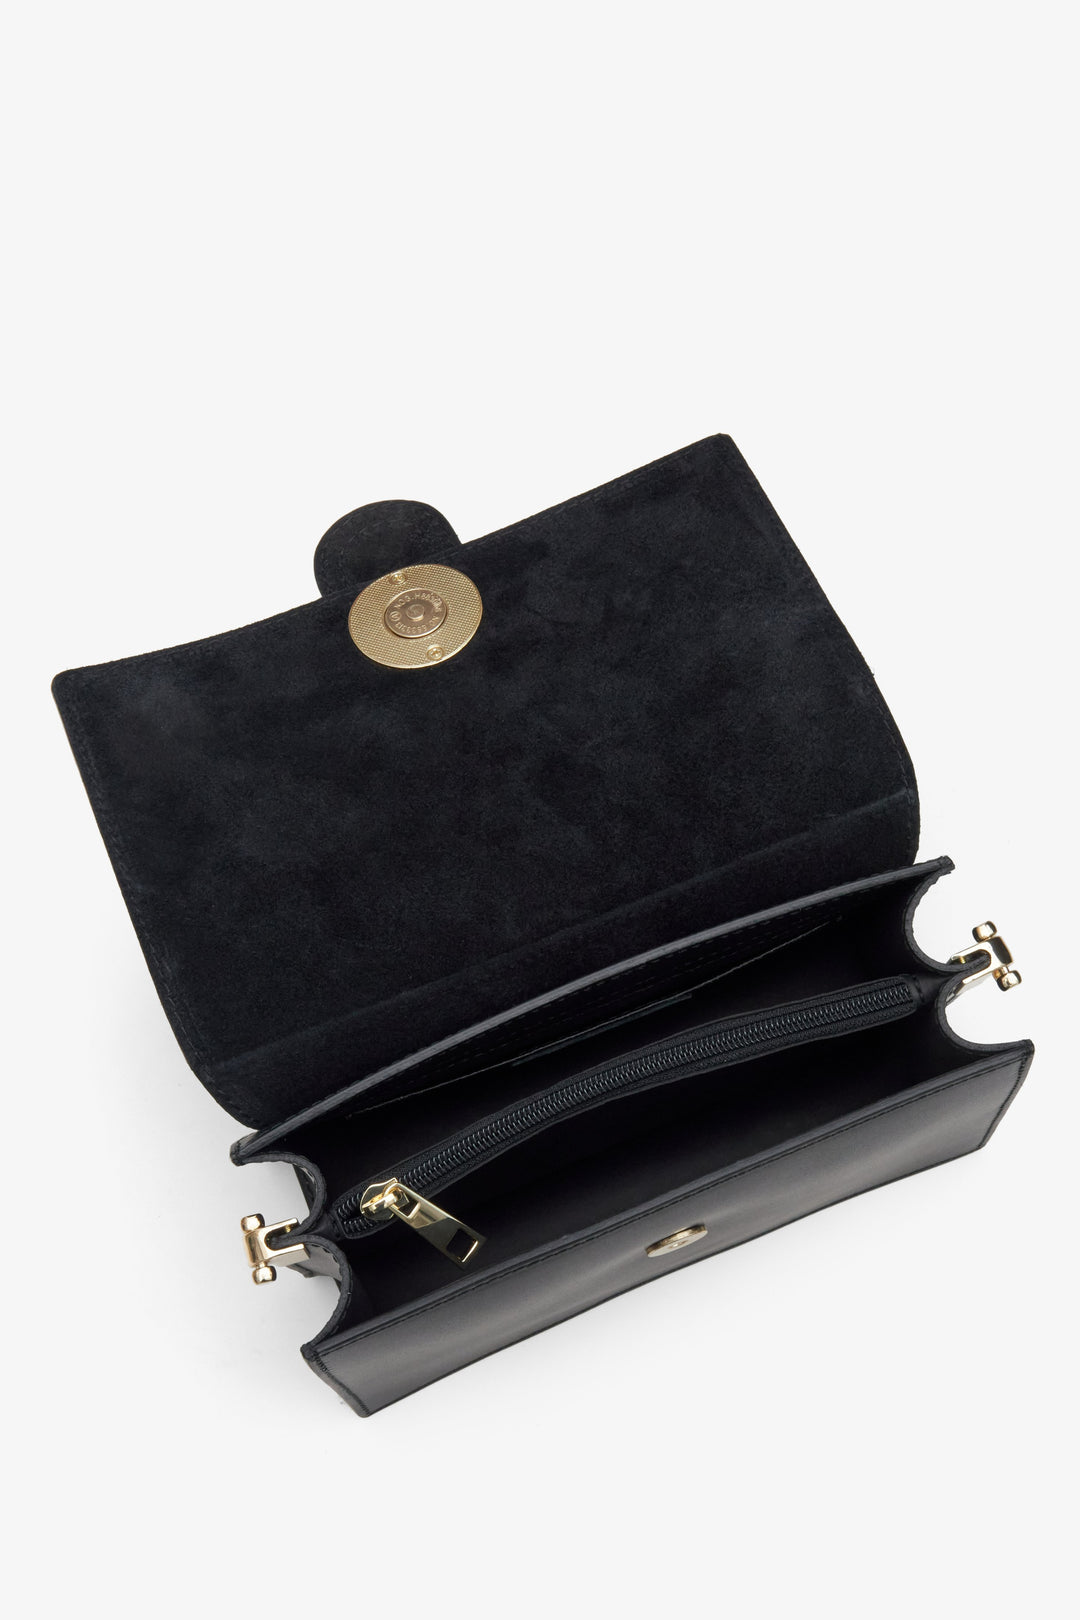 Women's black handy bag made with Italian leather - presentation of the main compartments.